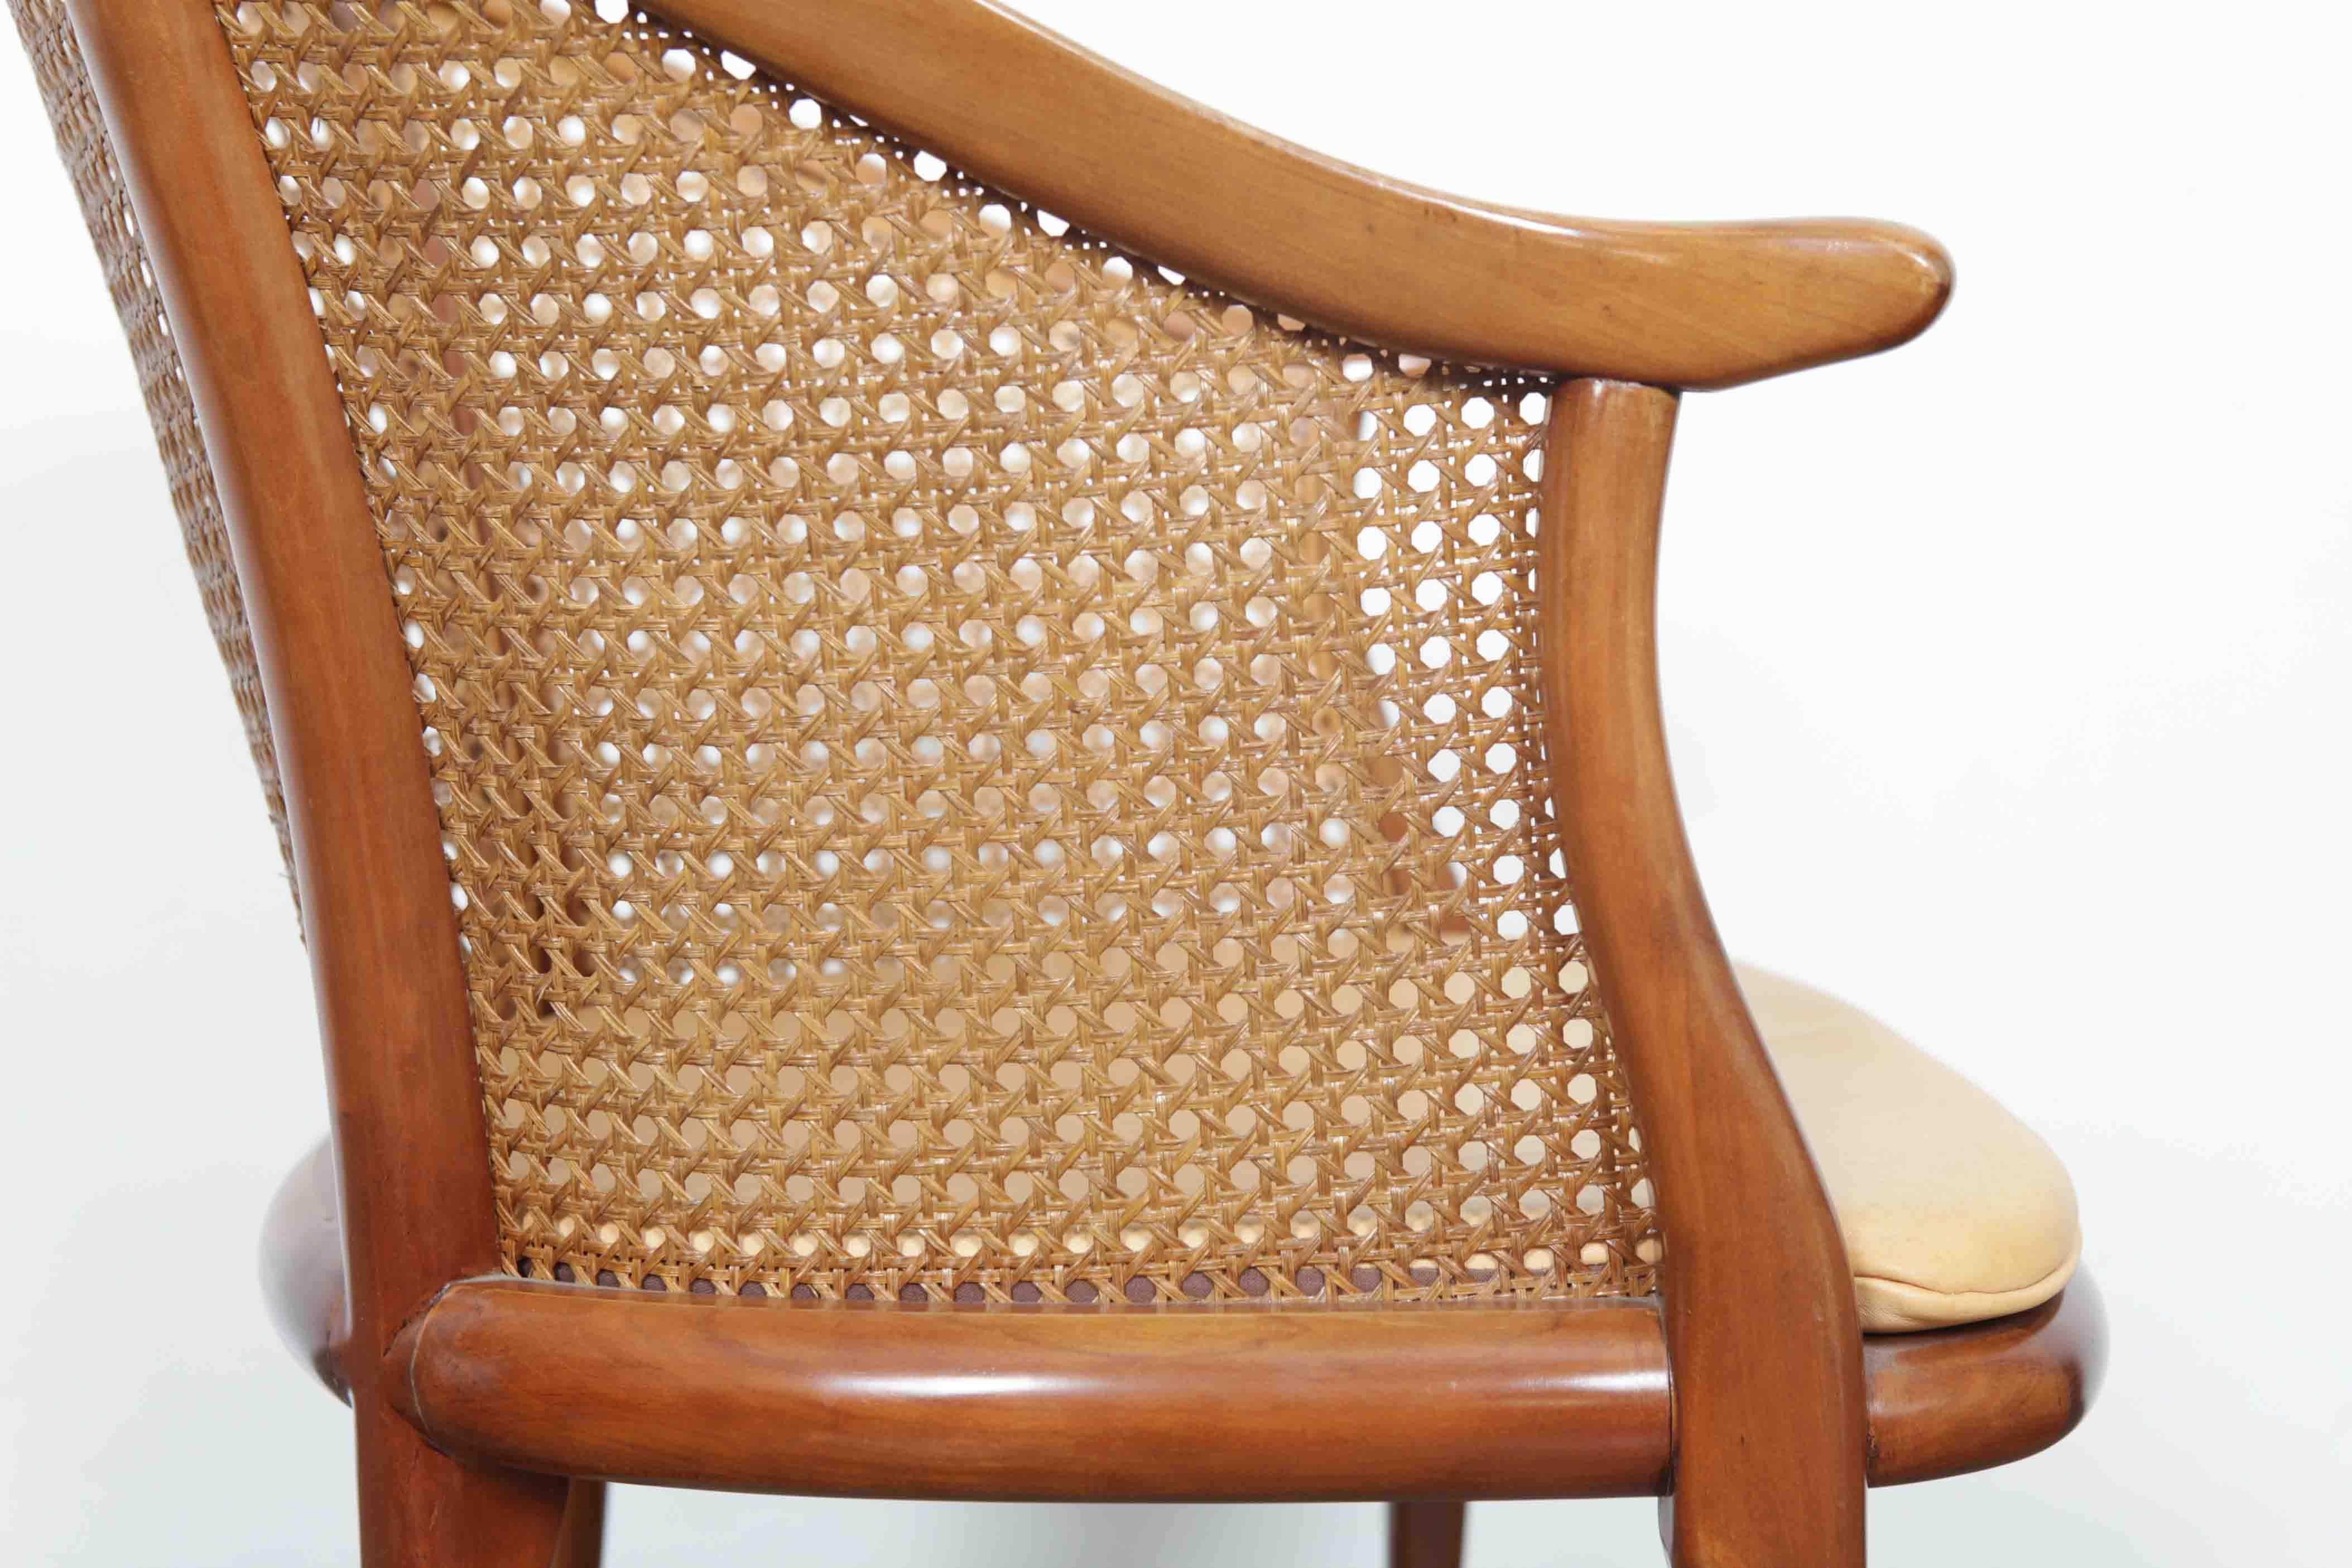 Pair of Cane and Leather Italian Chairs with Cherrywood Frames im Zustand „Gut“ in North Hollywood, CA